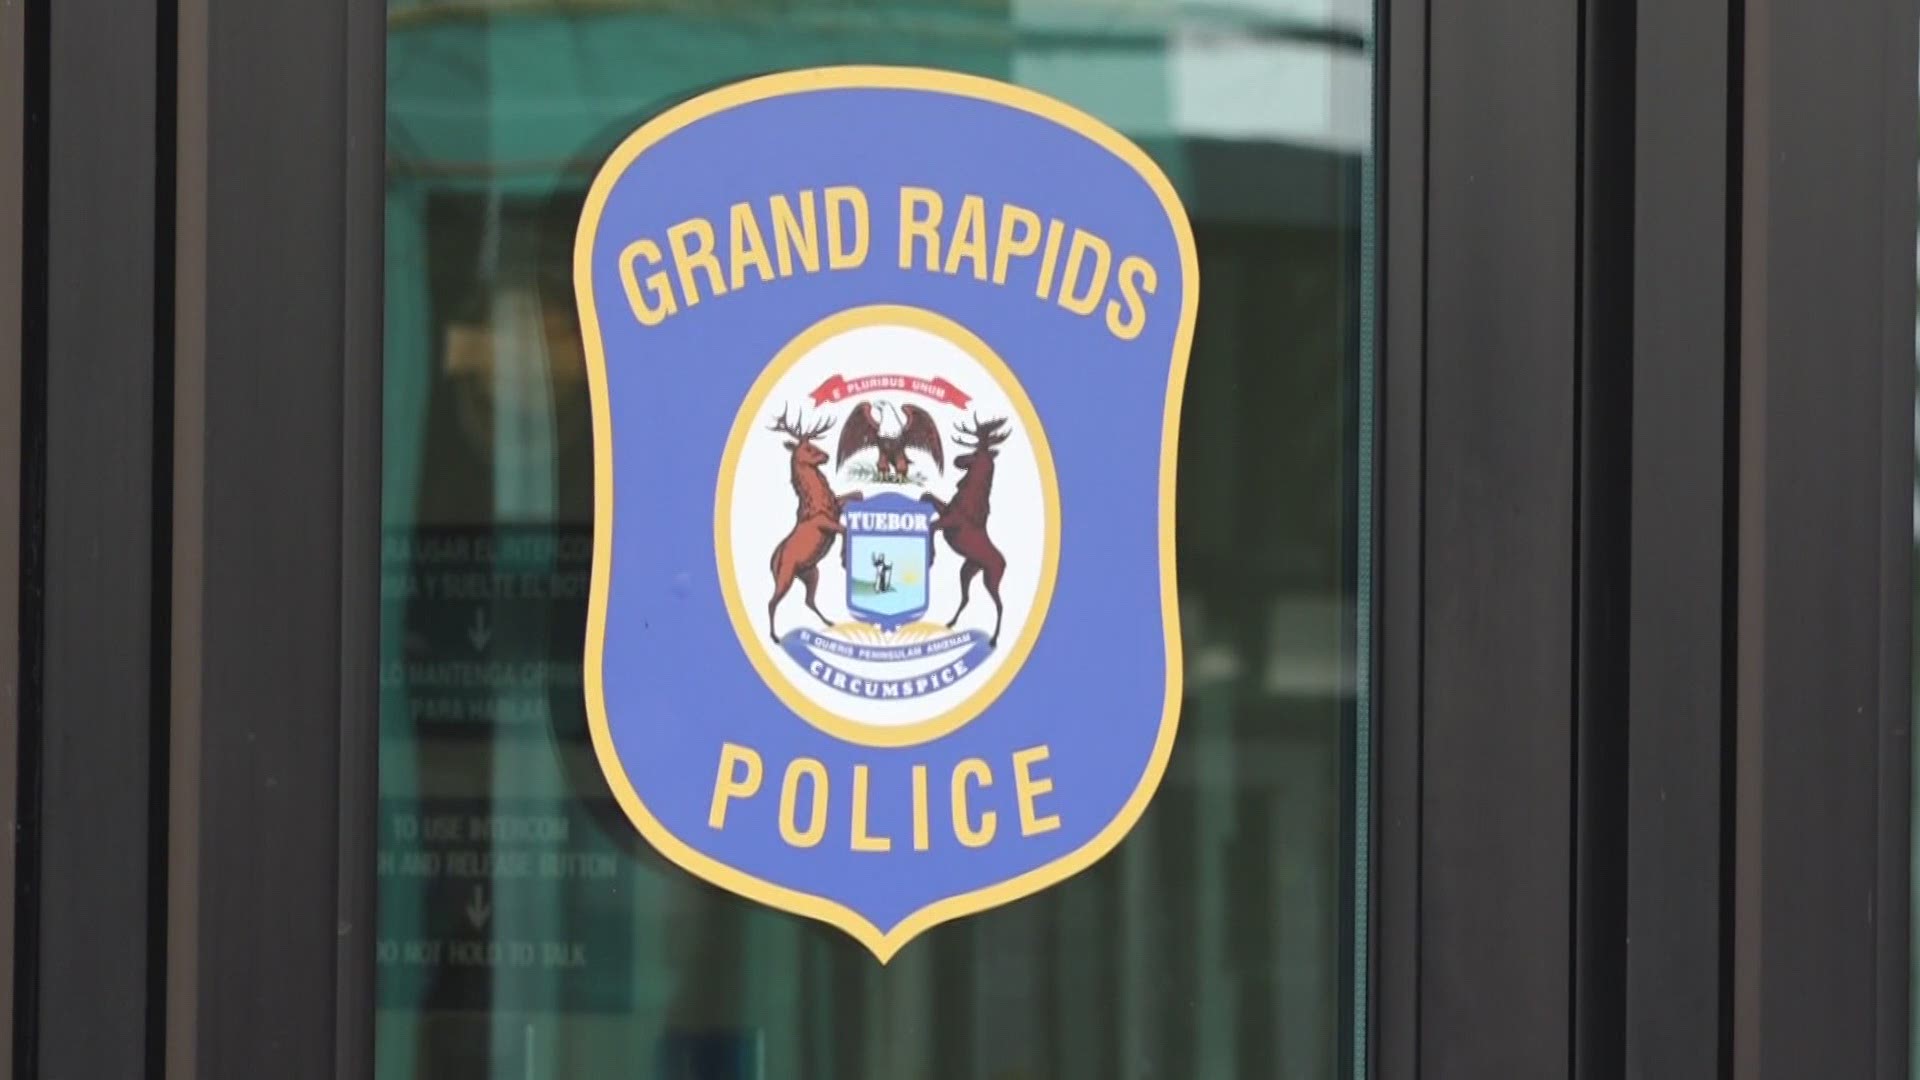 Grand Rapids Police pitched gunfire detection technology to city leaders this morning.